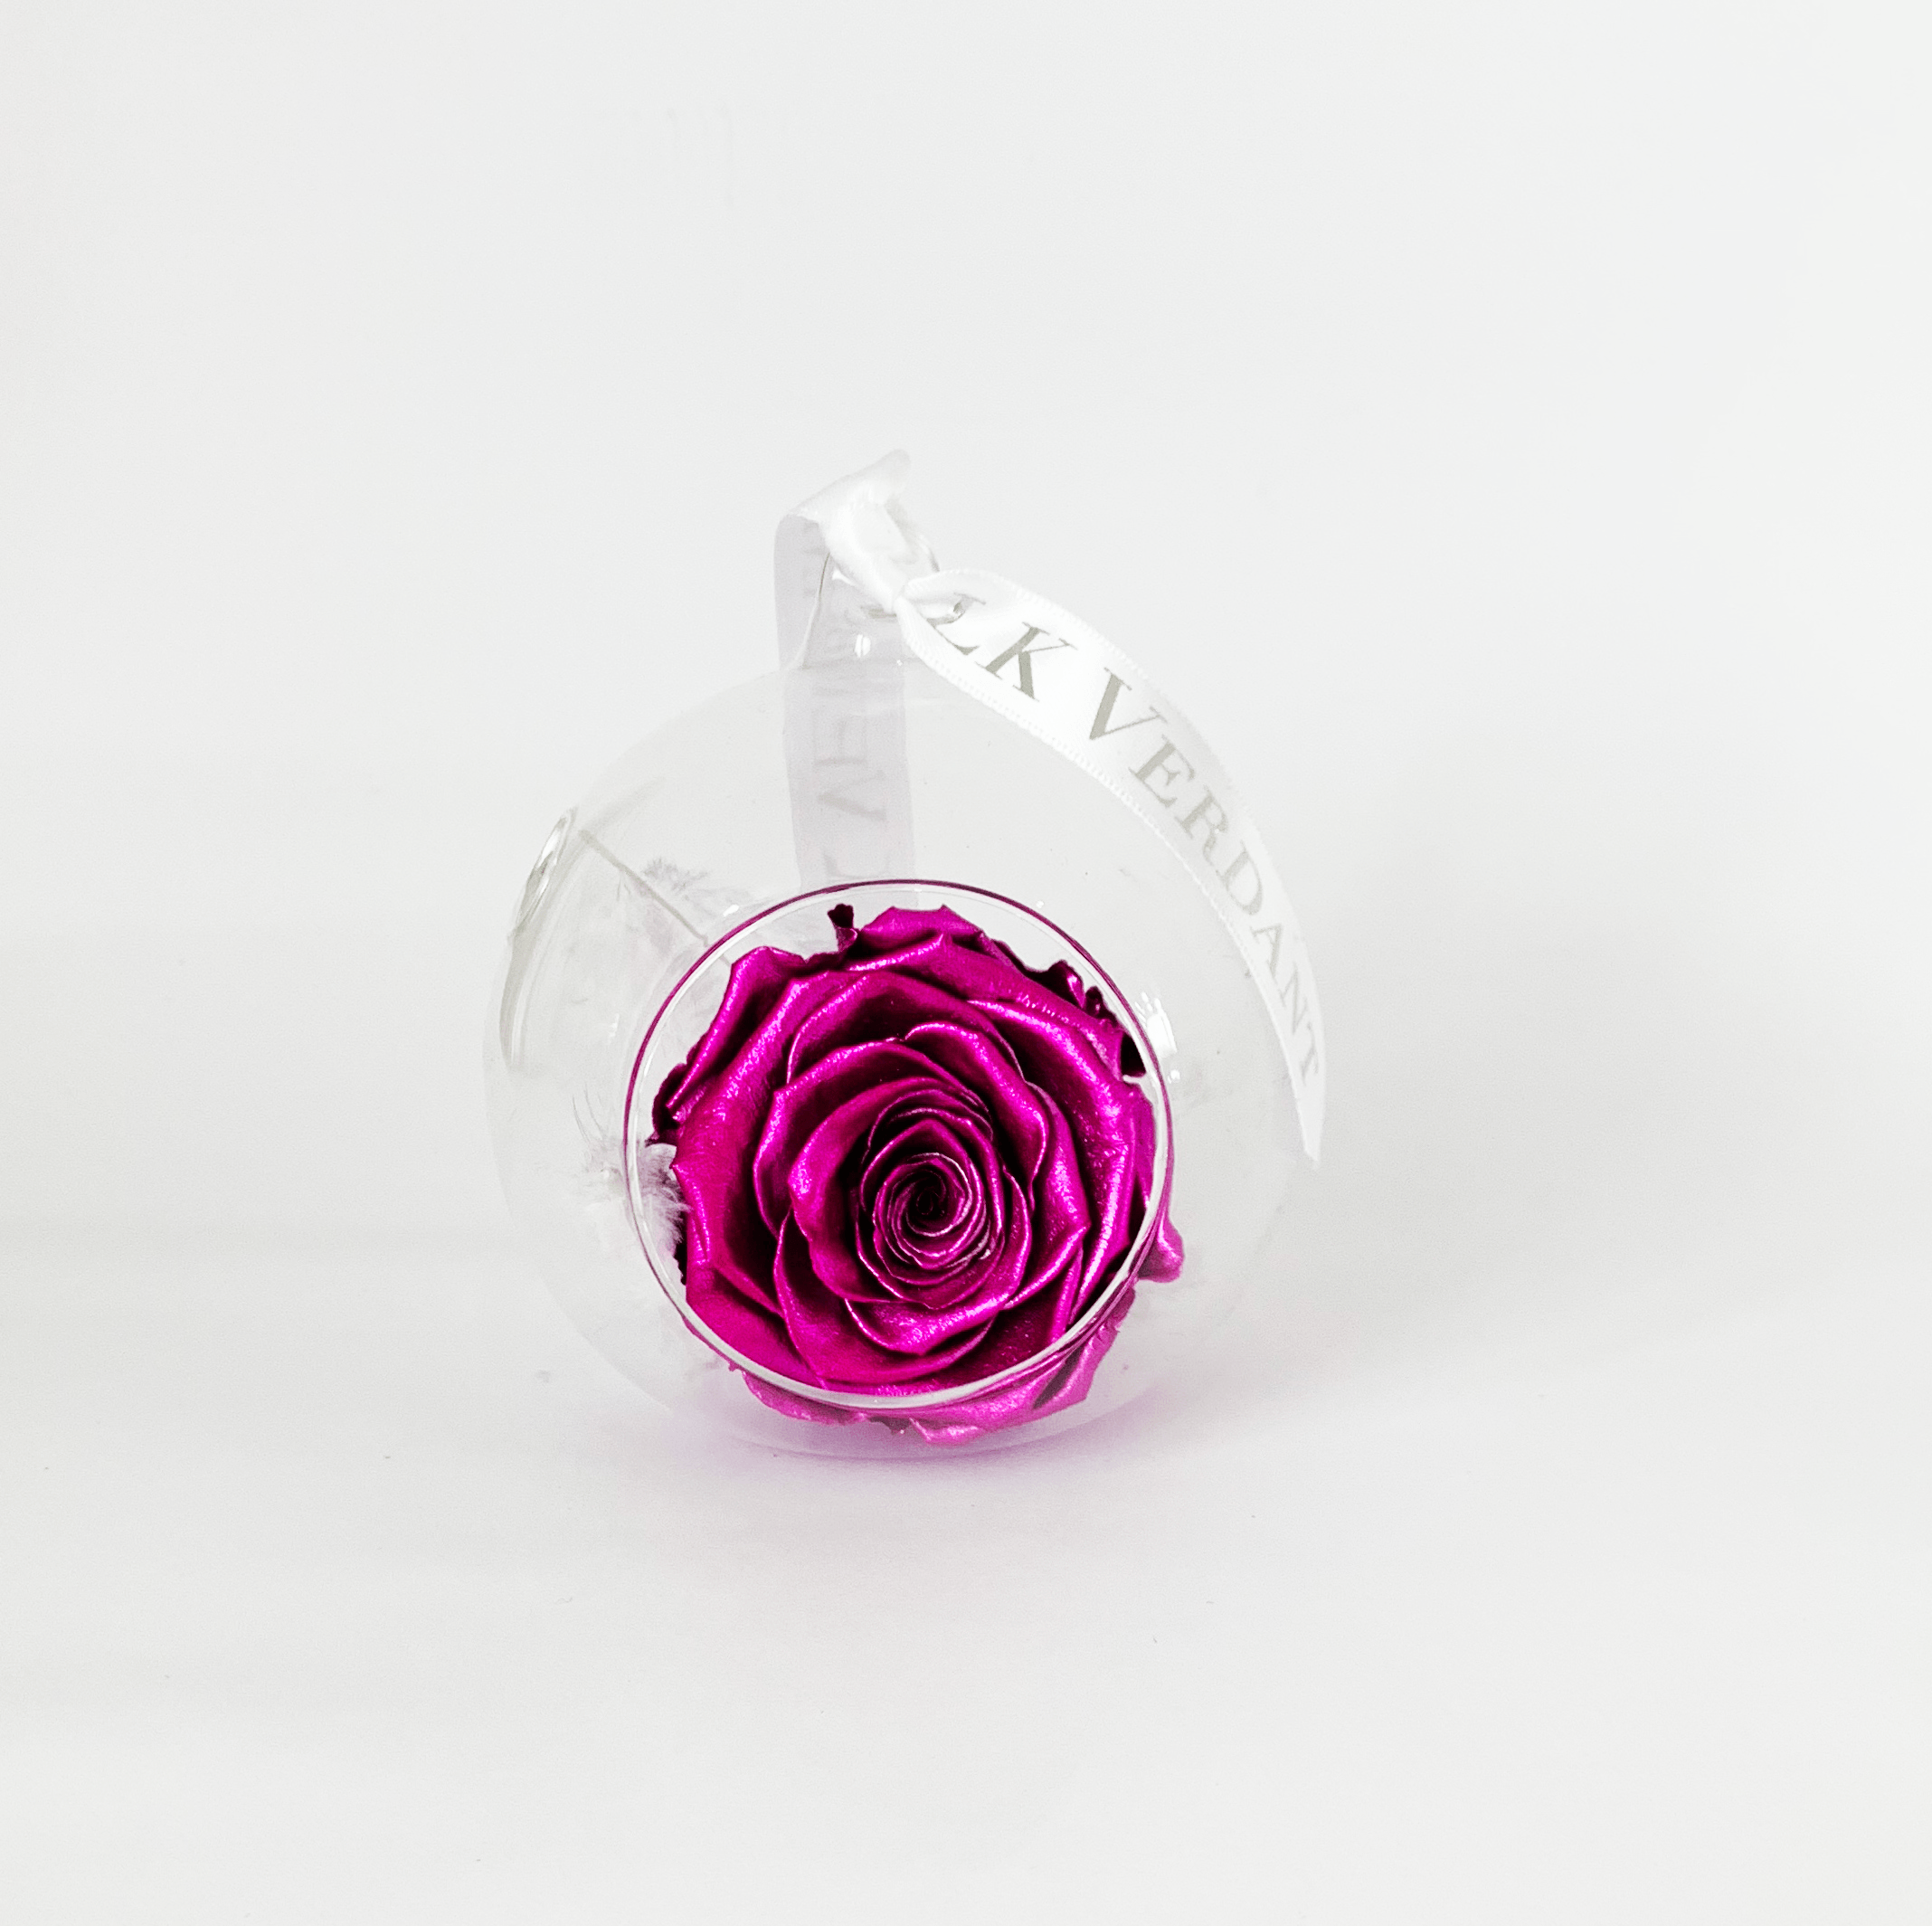 The Always Metallic Pink Forever Rose - Shop for Flowers and Forever Roses - LK VERDANT